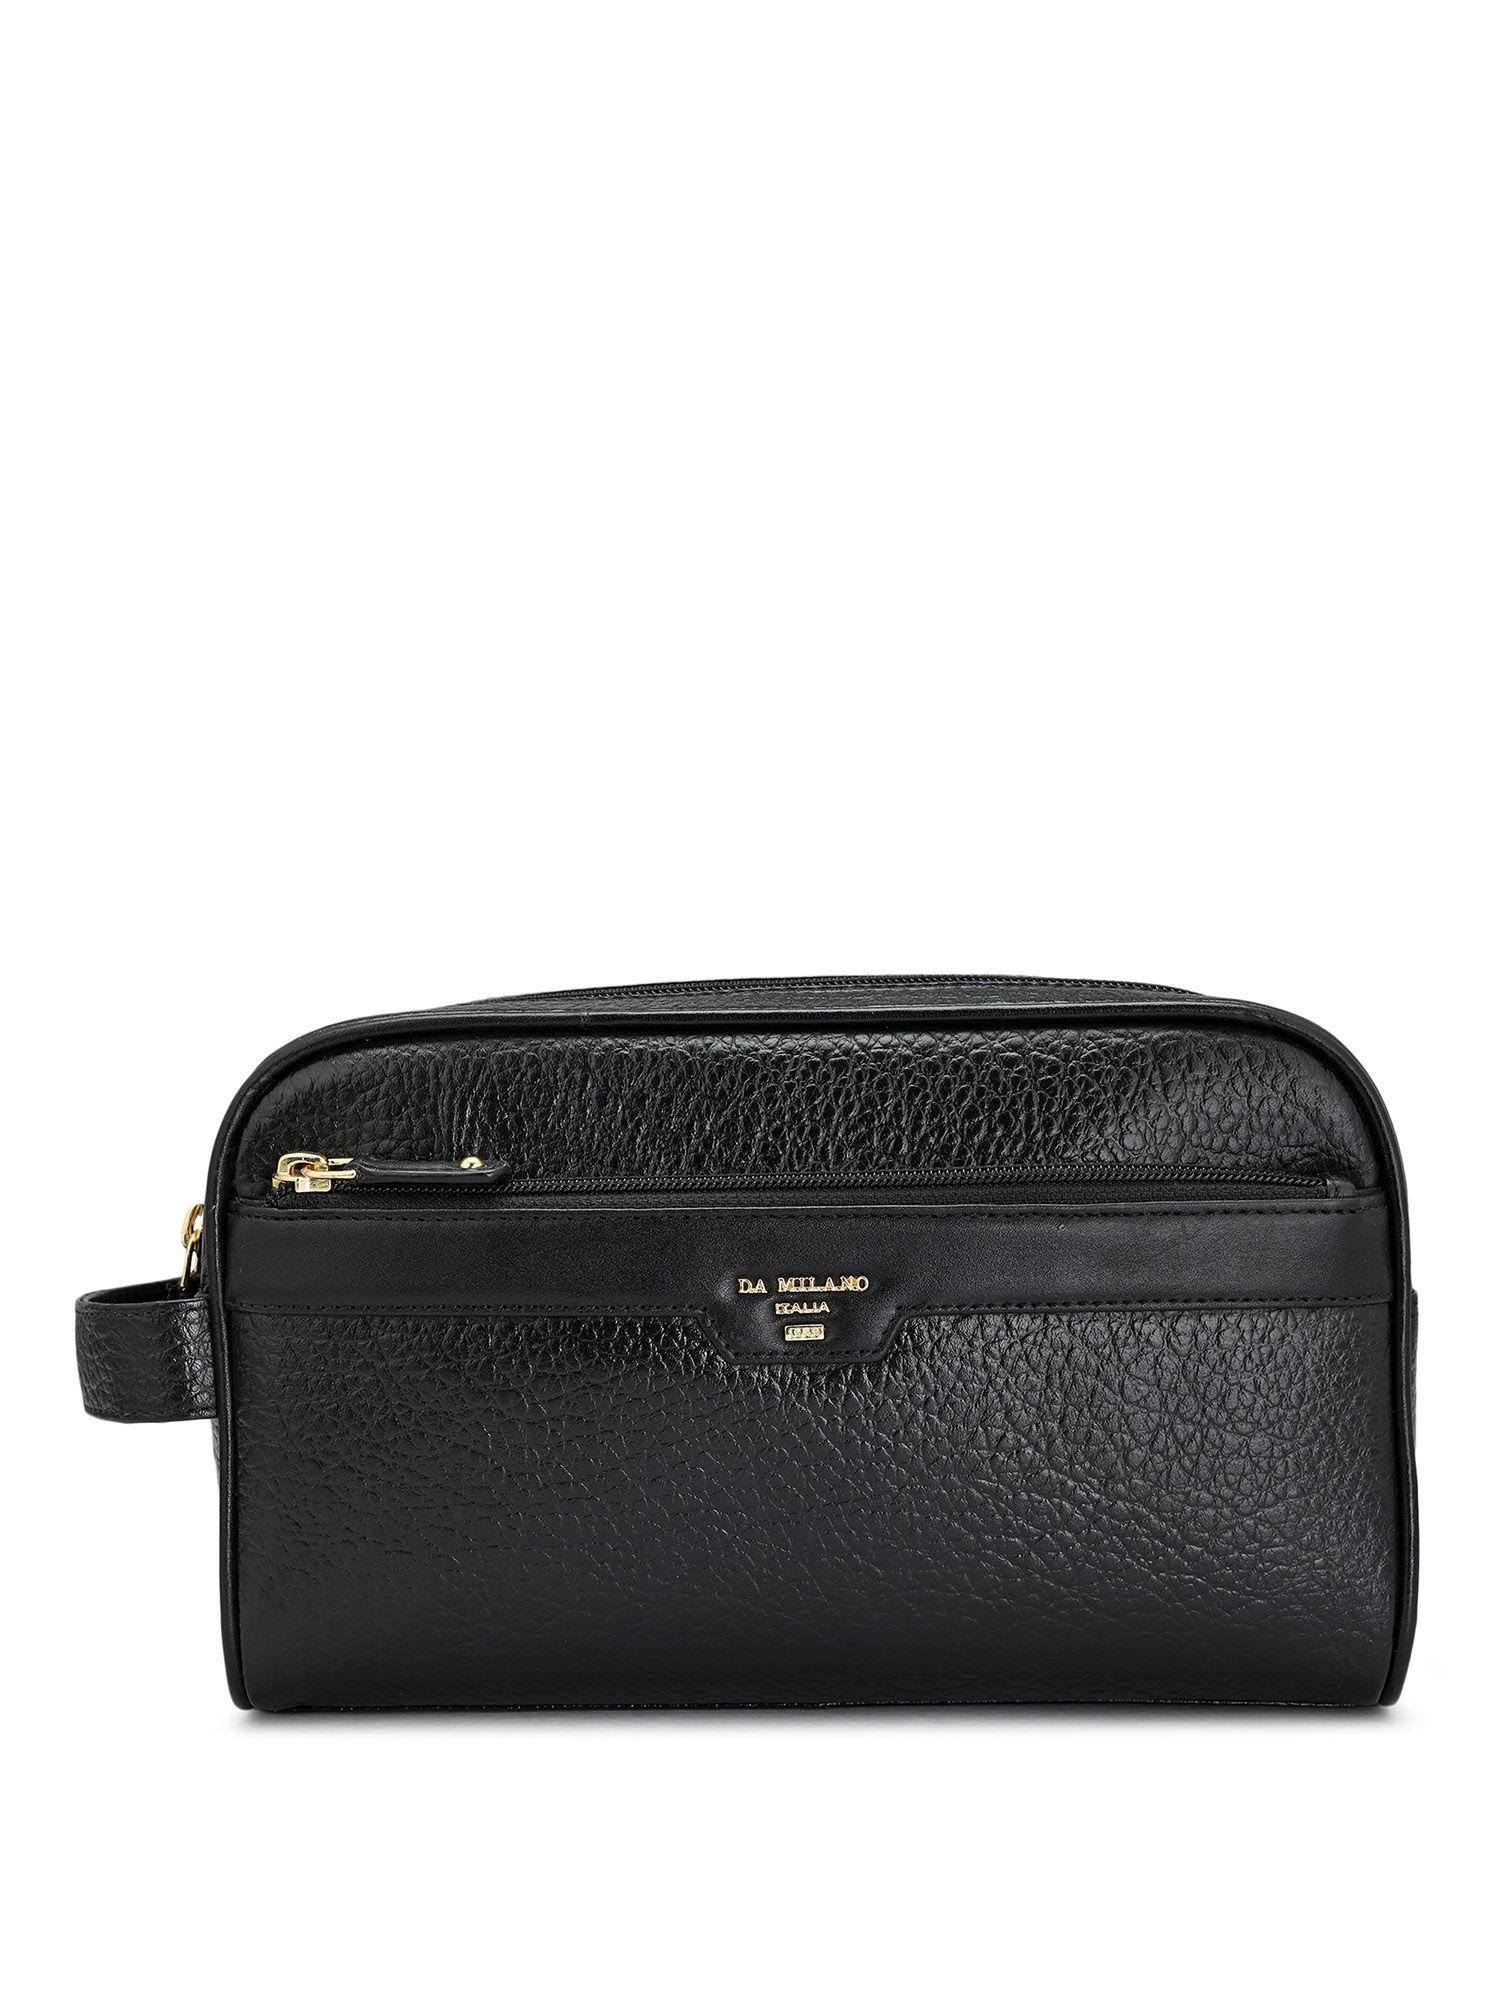 genuine leather black pouch